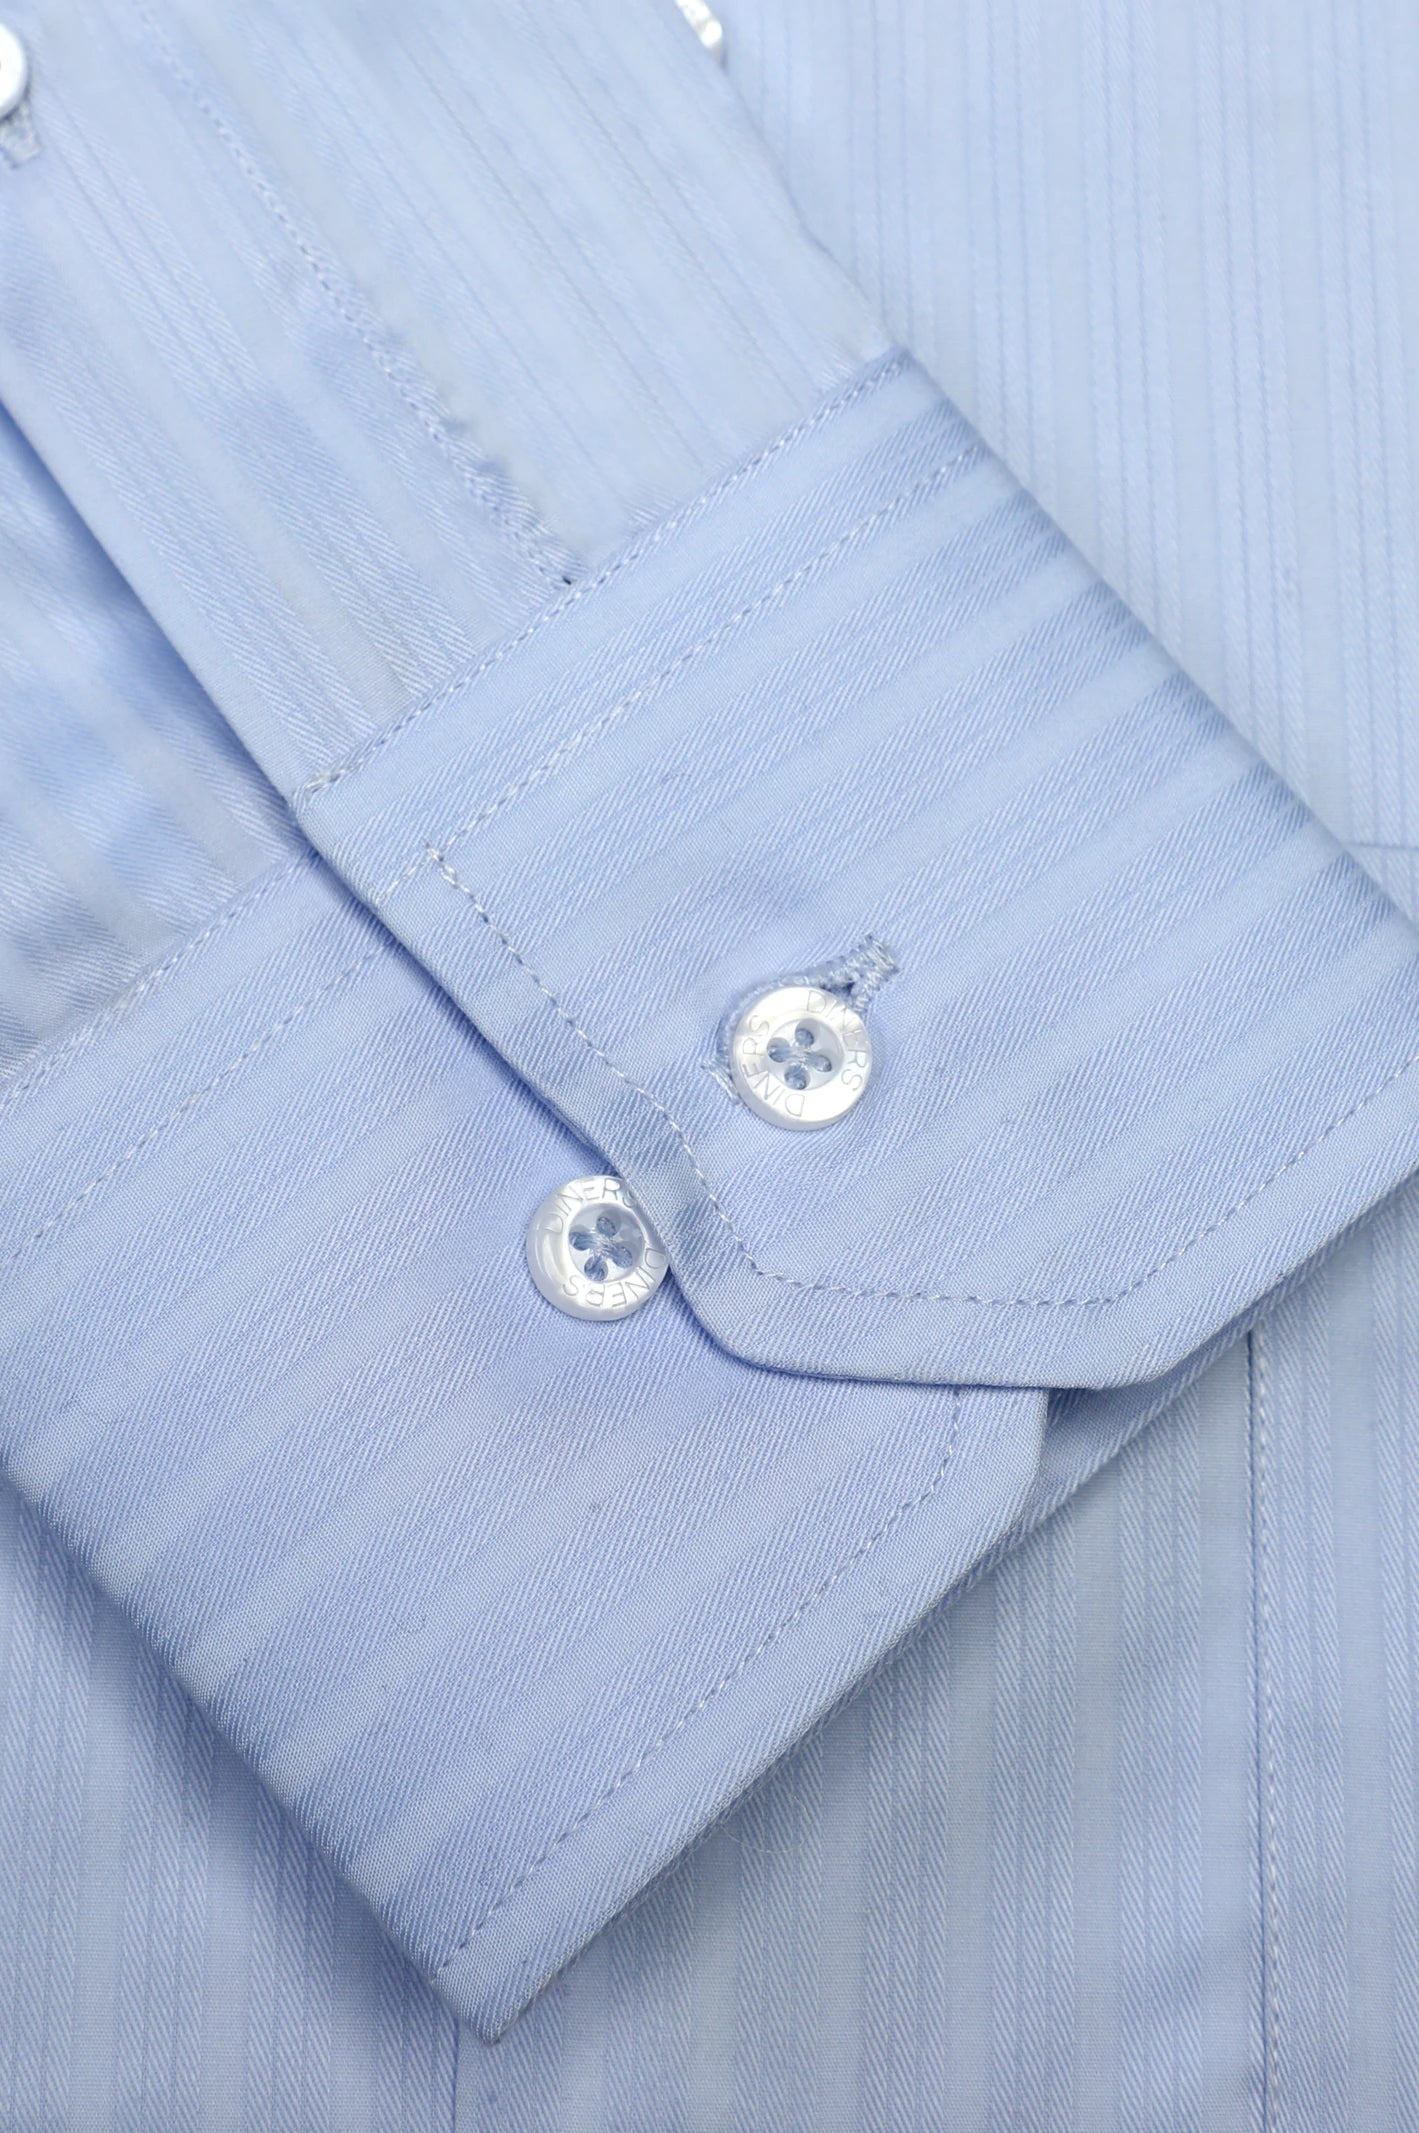 Textured Sky Blue Formal Shirt by Diners